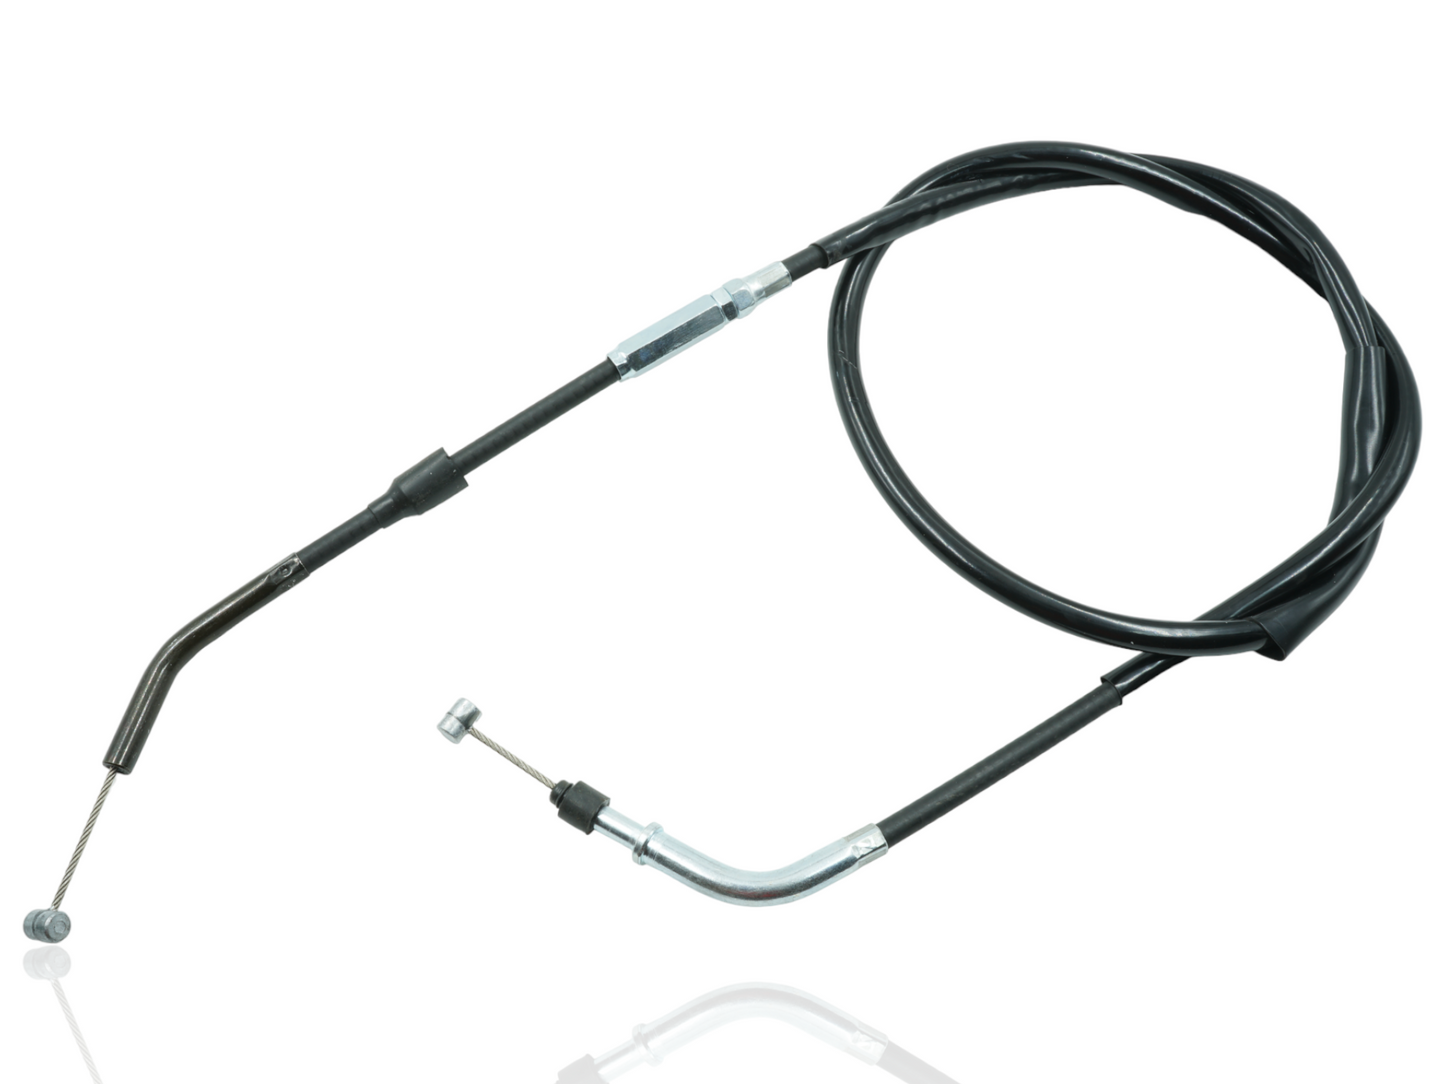 Replacement Clutch Cable for Kawasaki KFX400 2003-2006